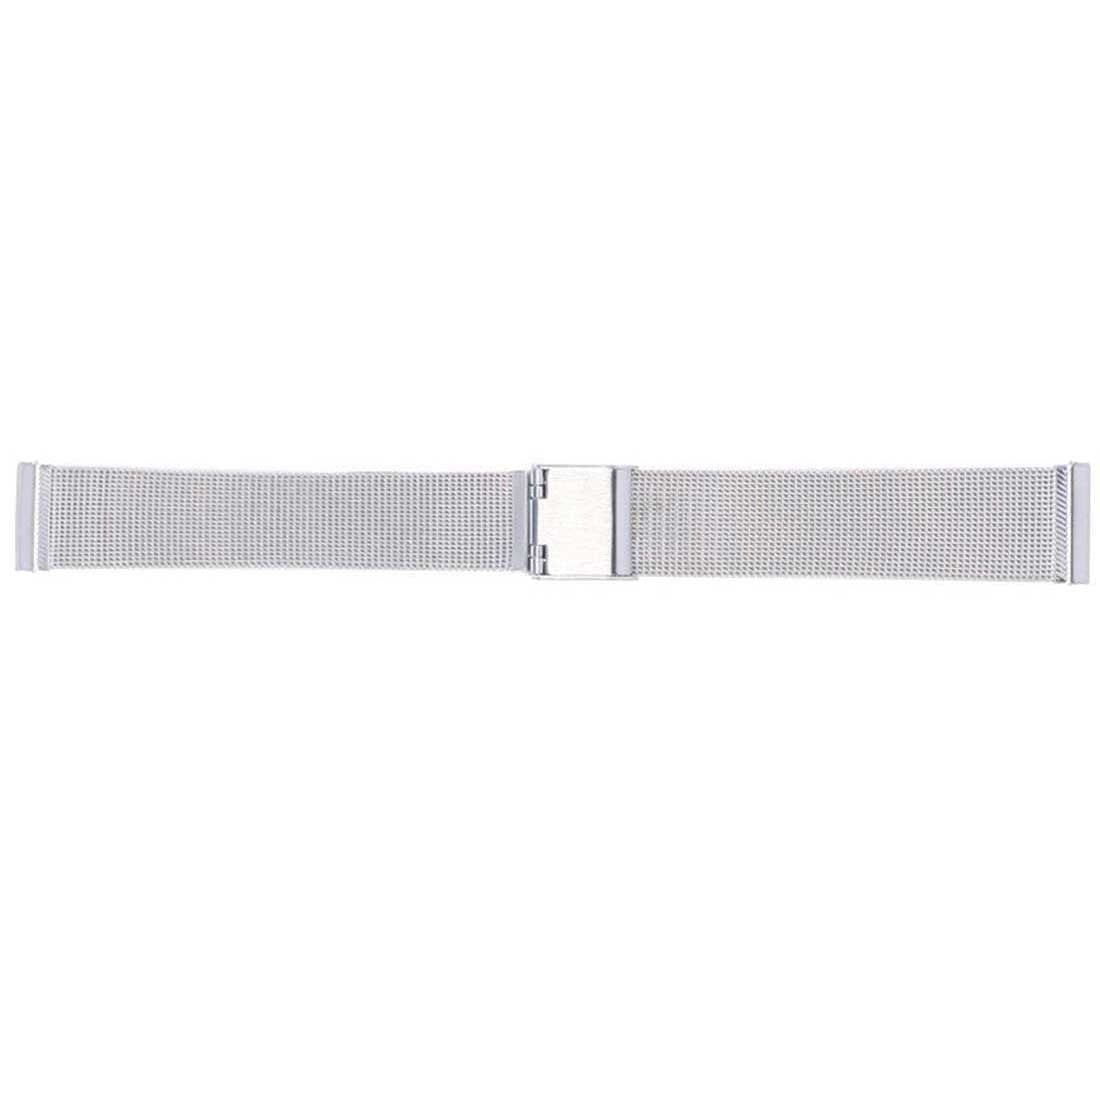 M572 Stainless Steel Mesh Band with Safety Lock Buckle